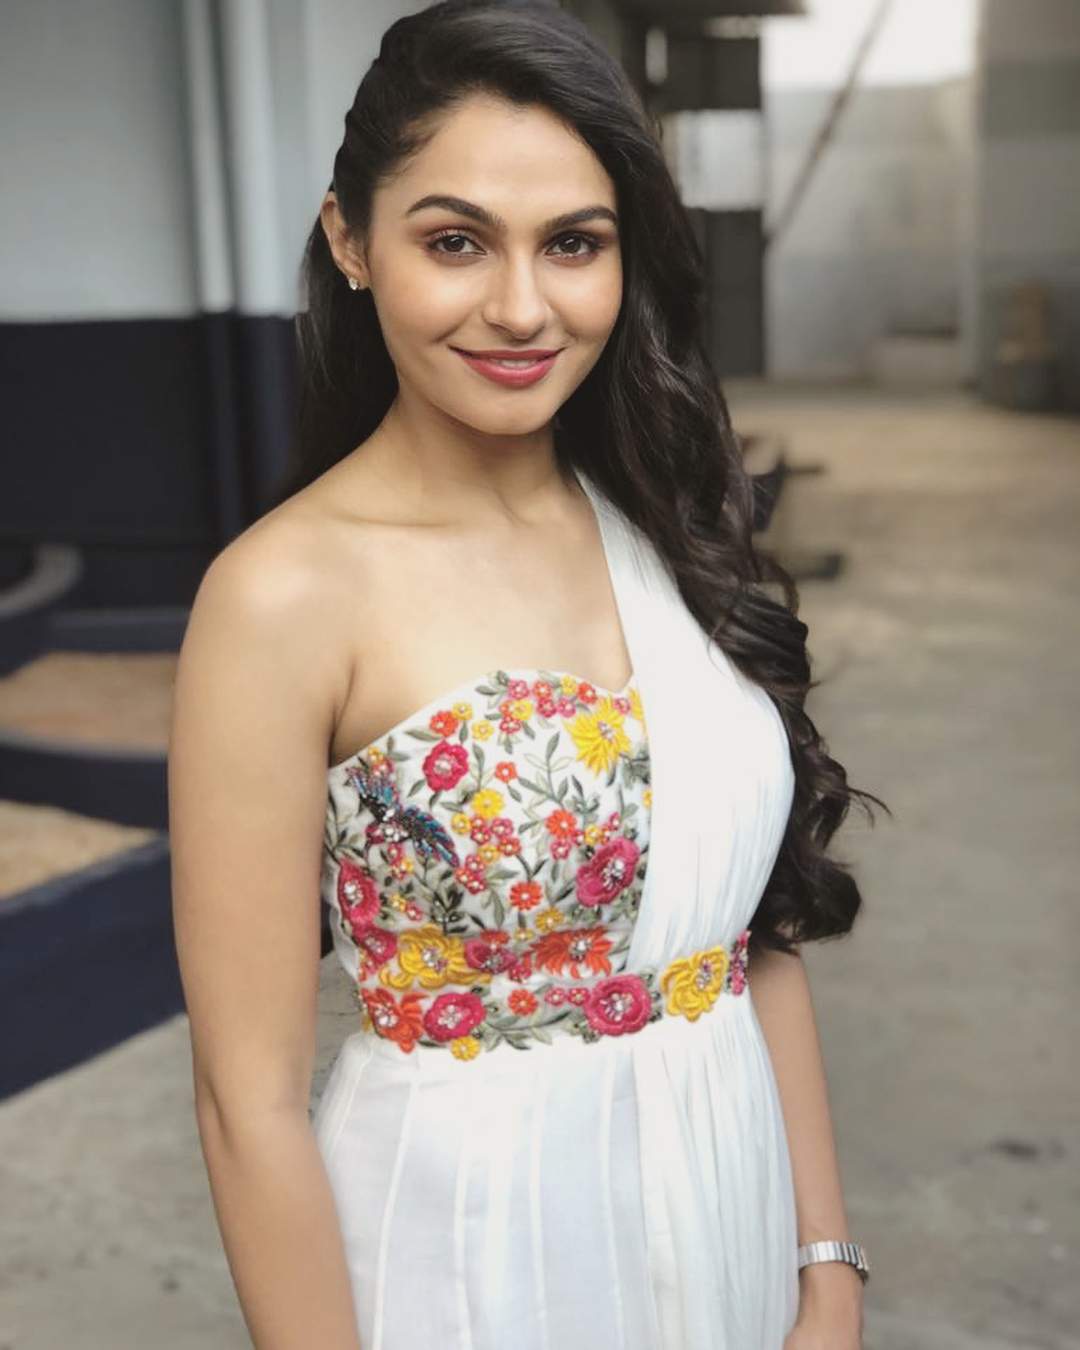 Andrea Jeremiah Wallpapers